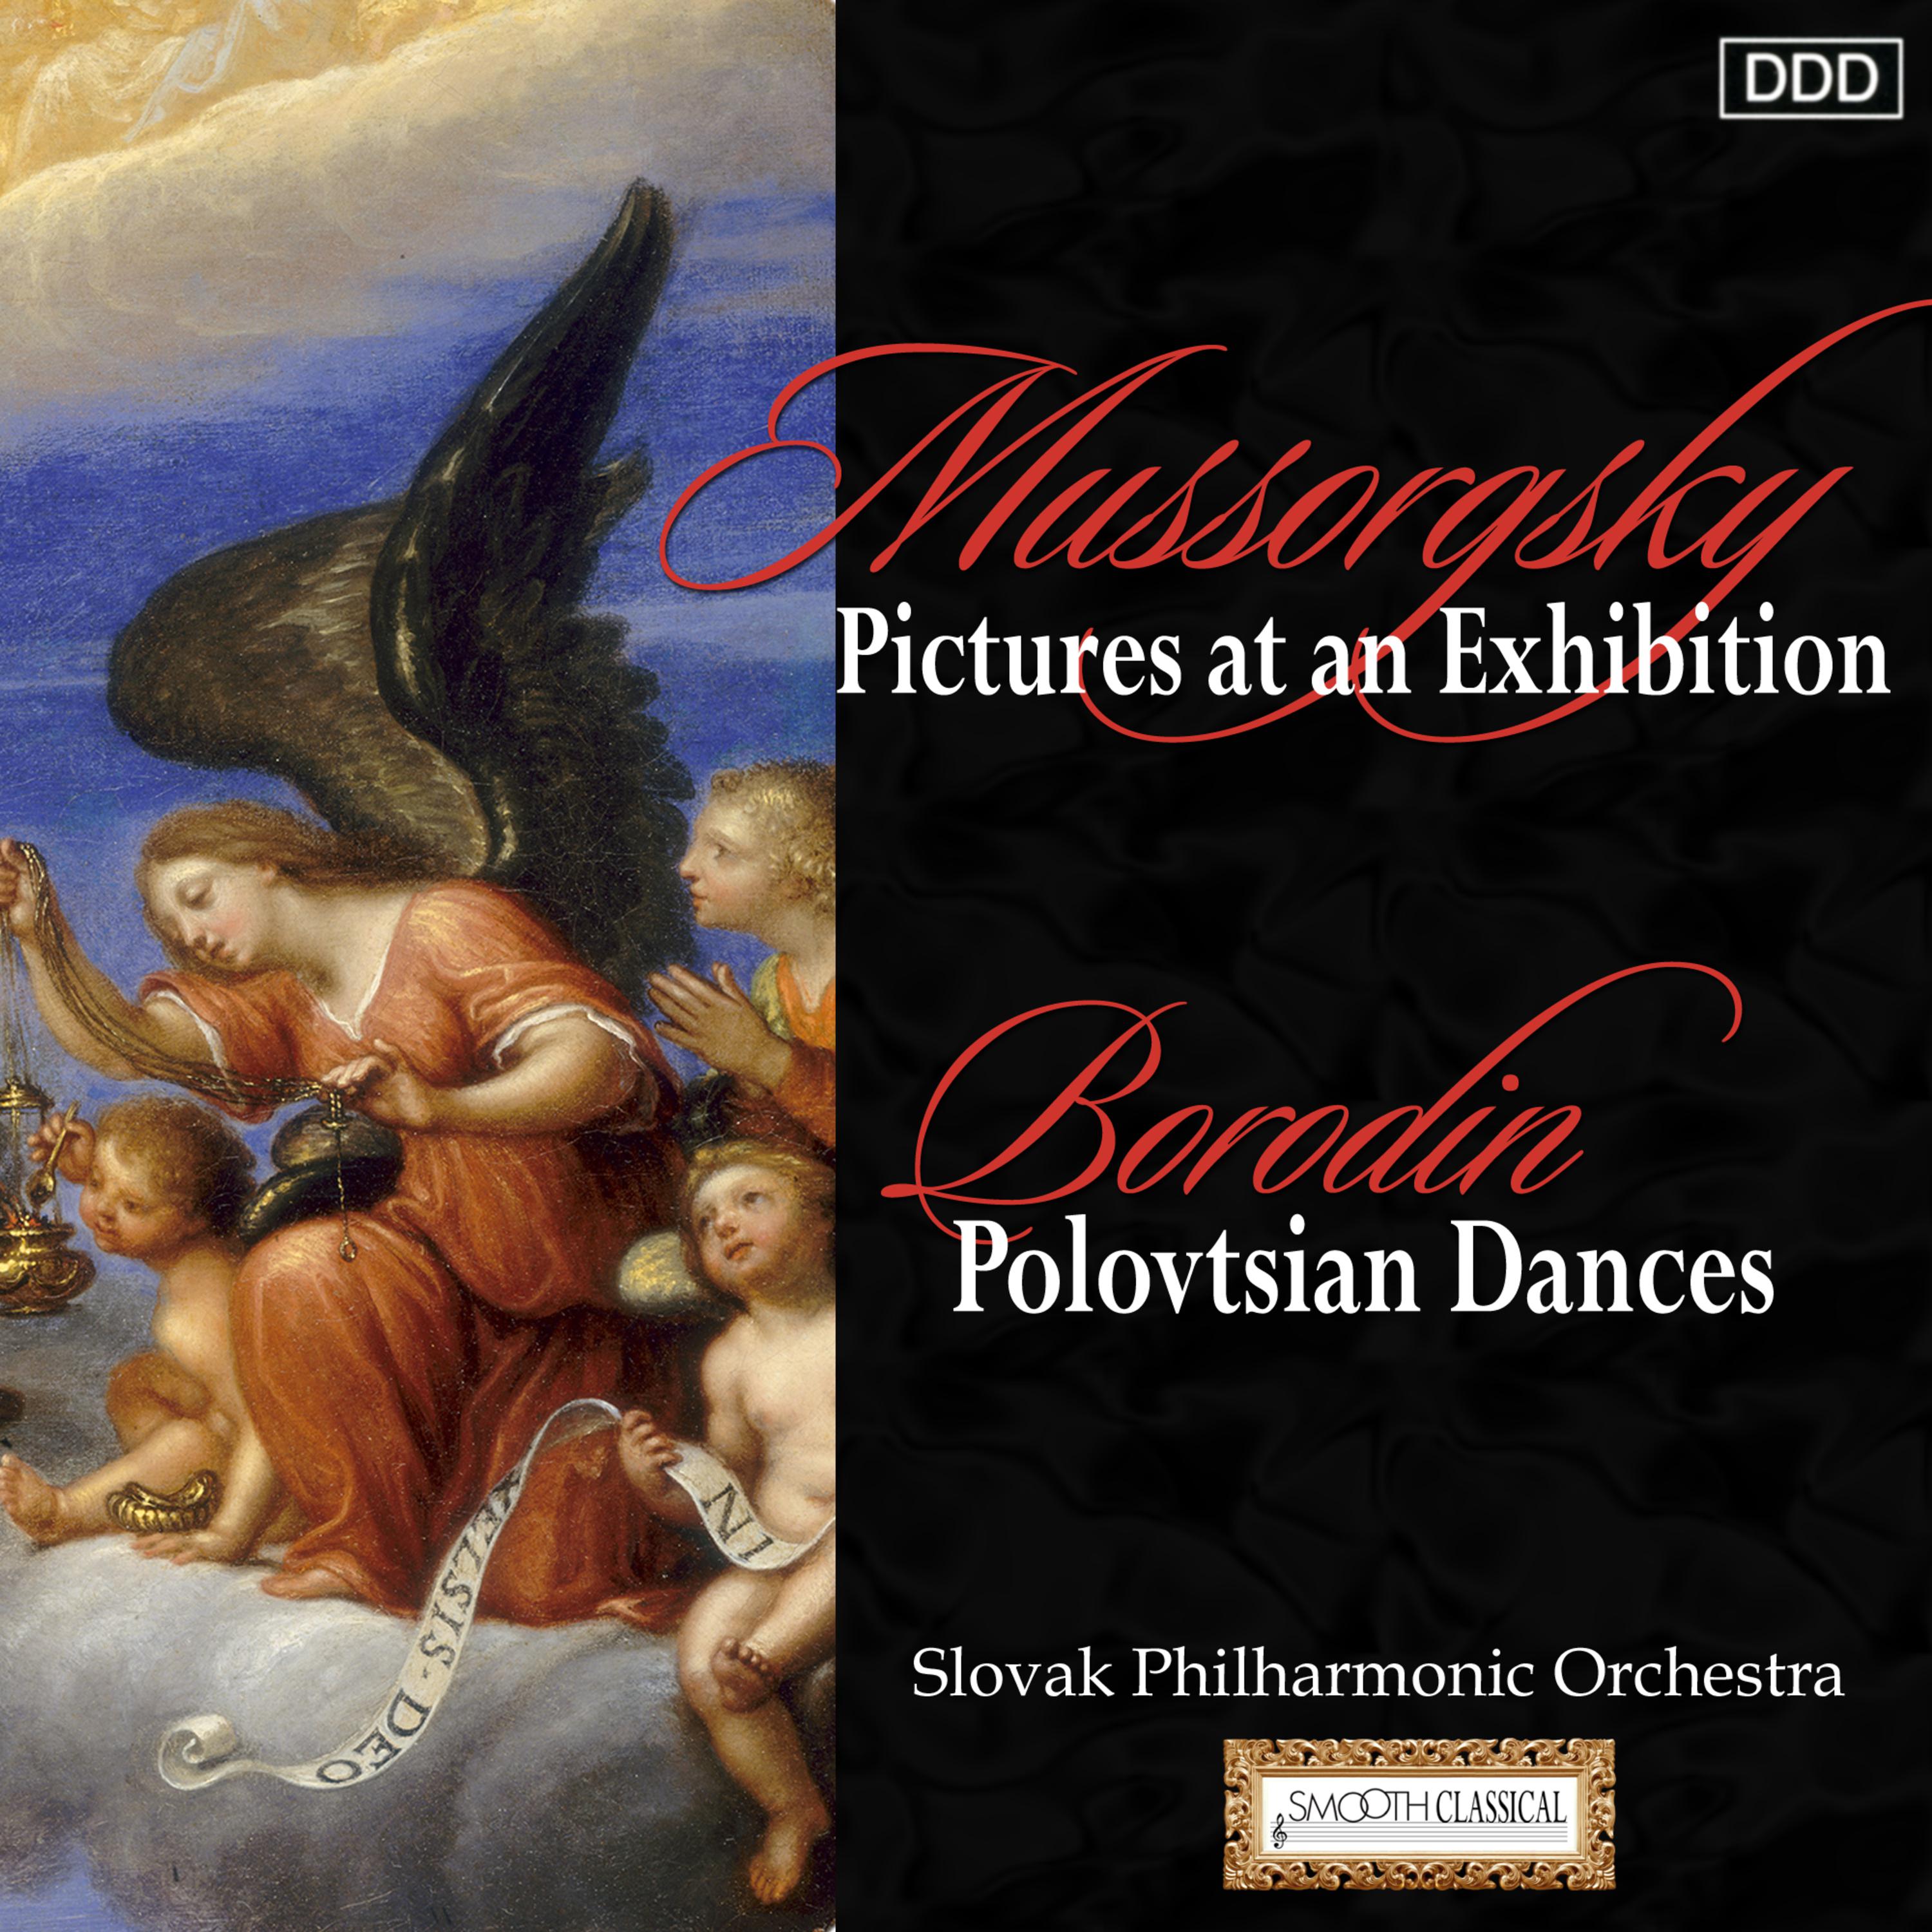 Mussorgsky: Pictures at an Exhibition - Borodin: Polovtsian Dances